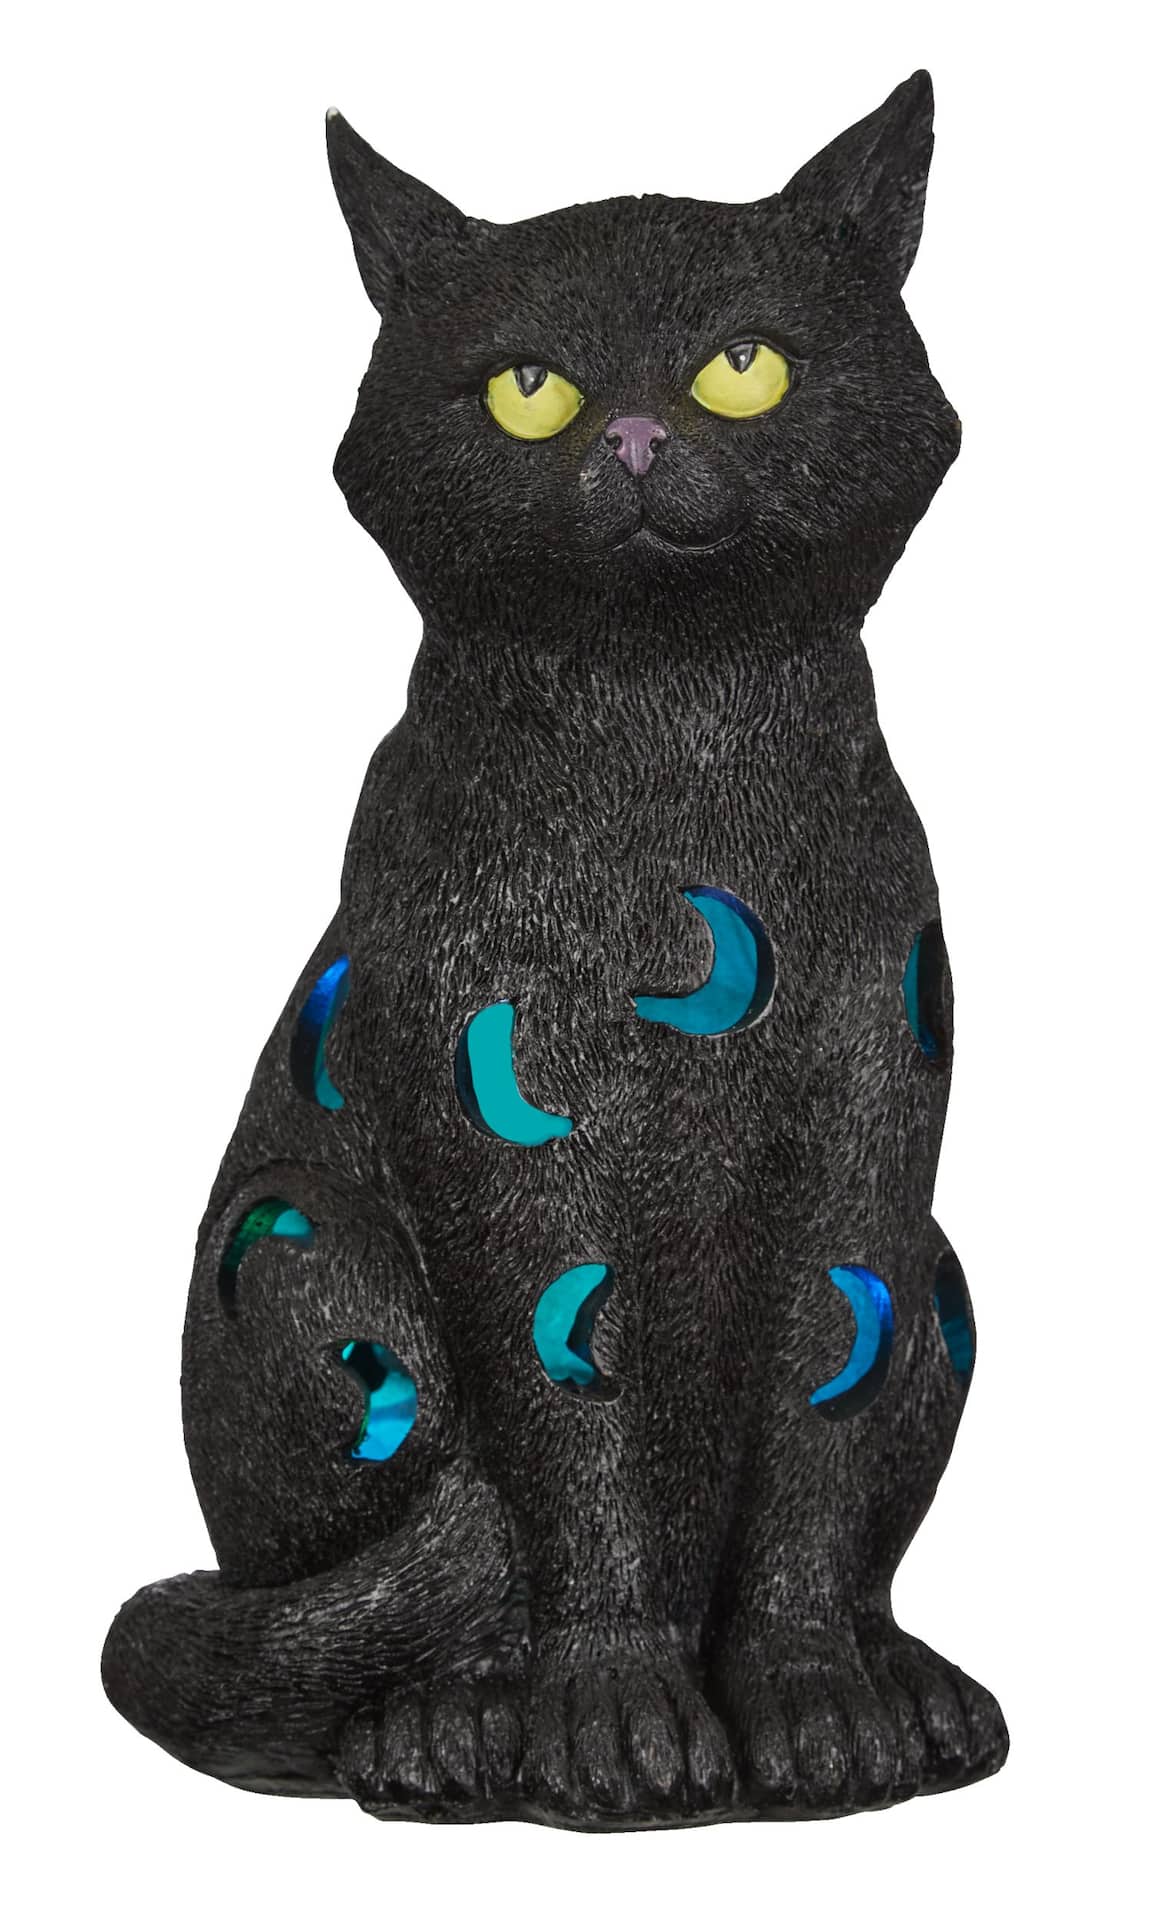 For Living Black Cat LED Light-Up Colour Changing, Moon Print, 10 1/4-in,  Indoor/Outdoor Decoration for Halloween